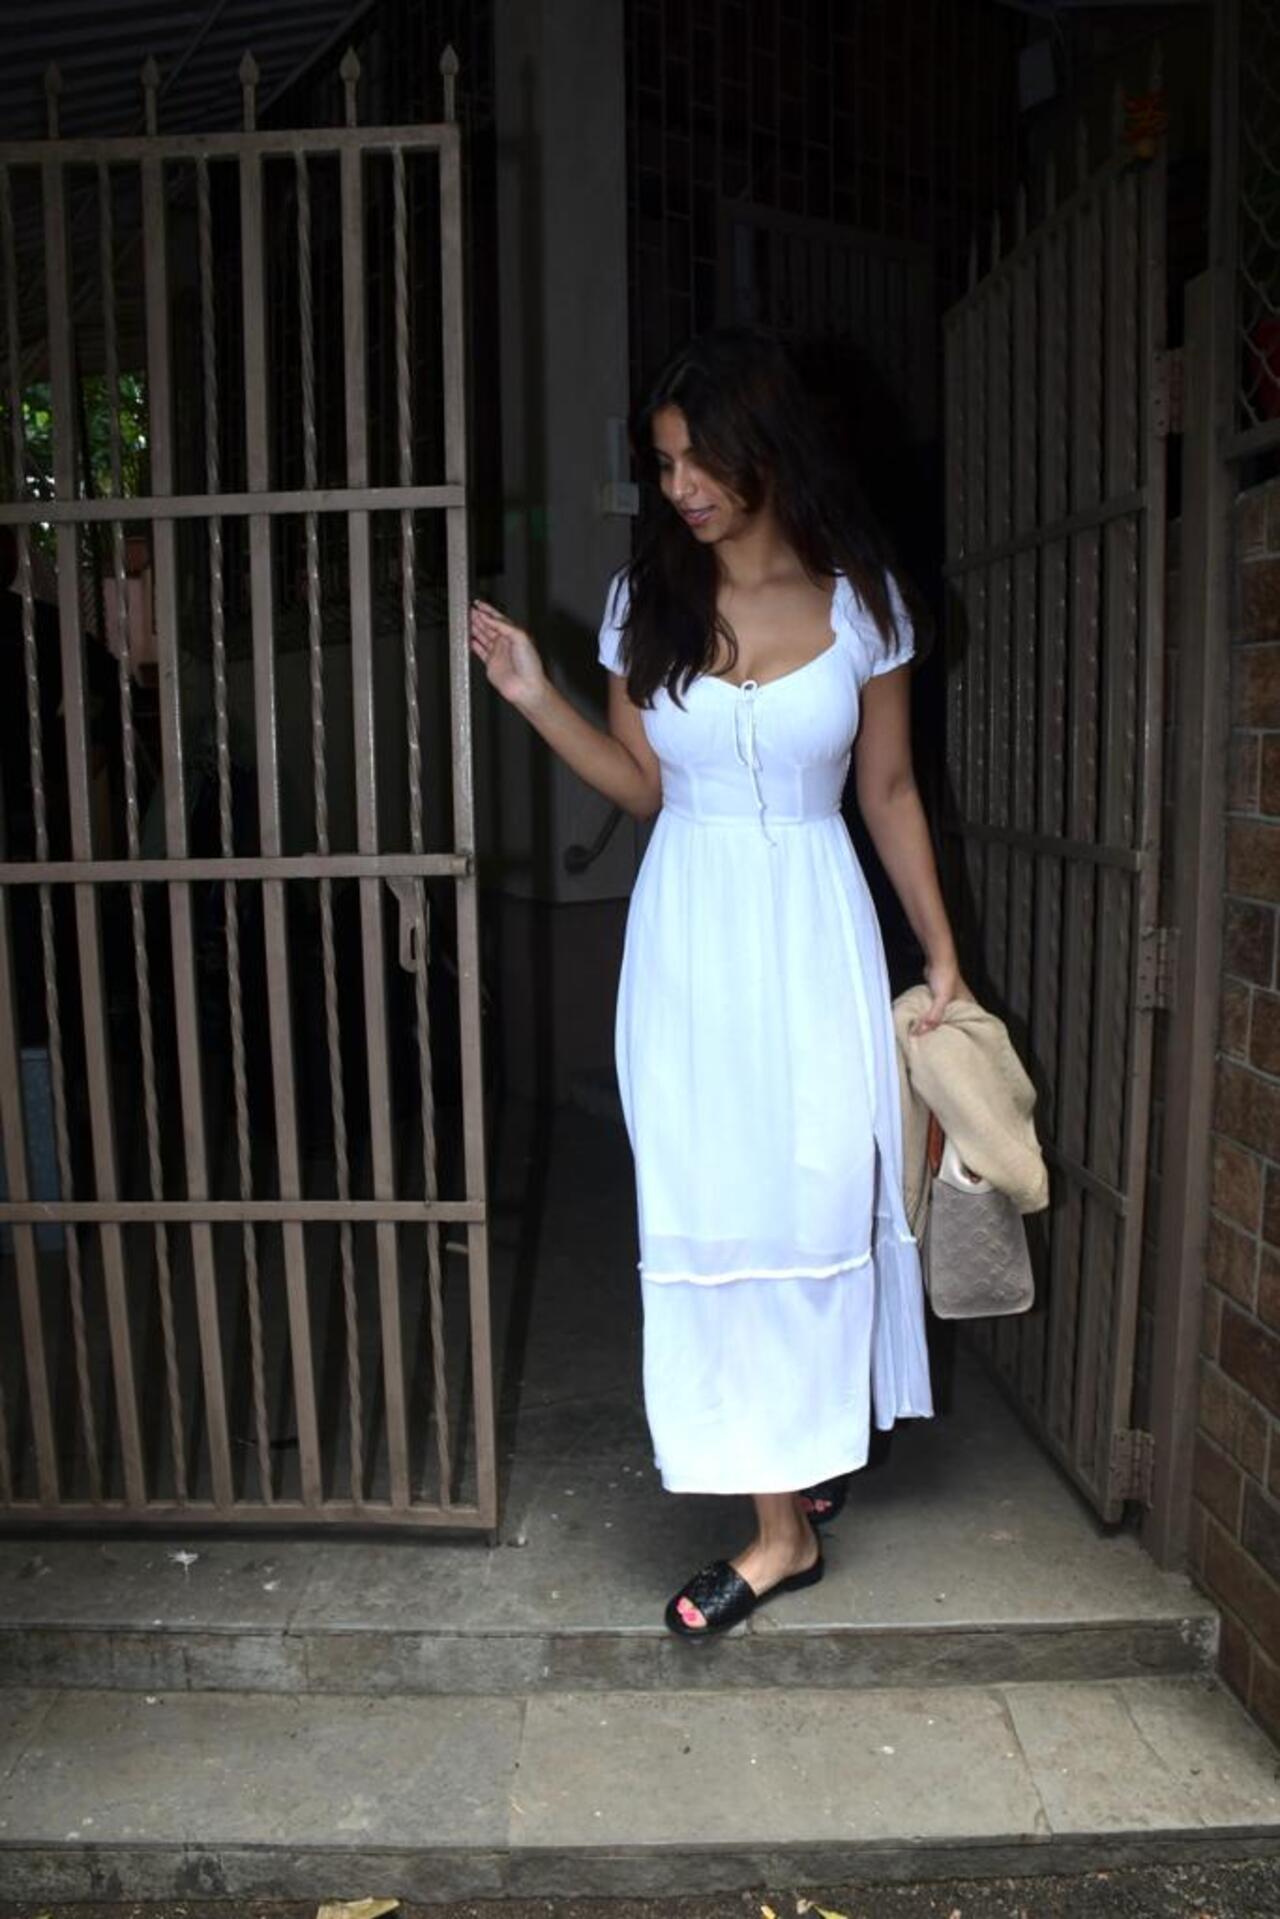 Suhana Khan was at a dubbing studio in Mumbai. She was seen with her mother Gauri Khan and the director of her debut film, The Archies, Zoya Akhtar